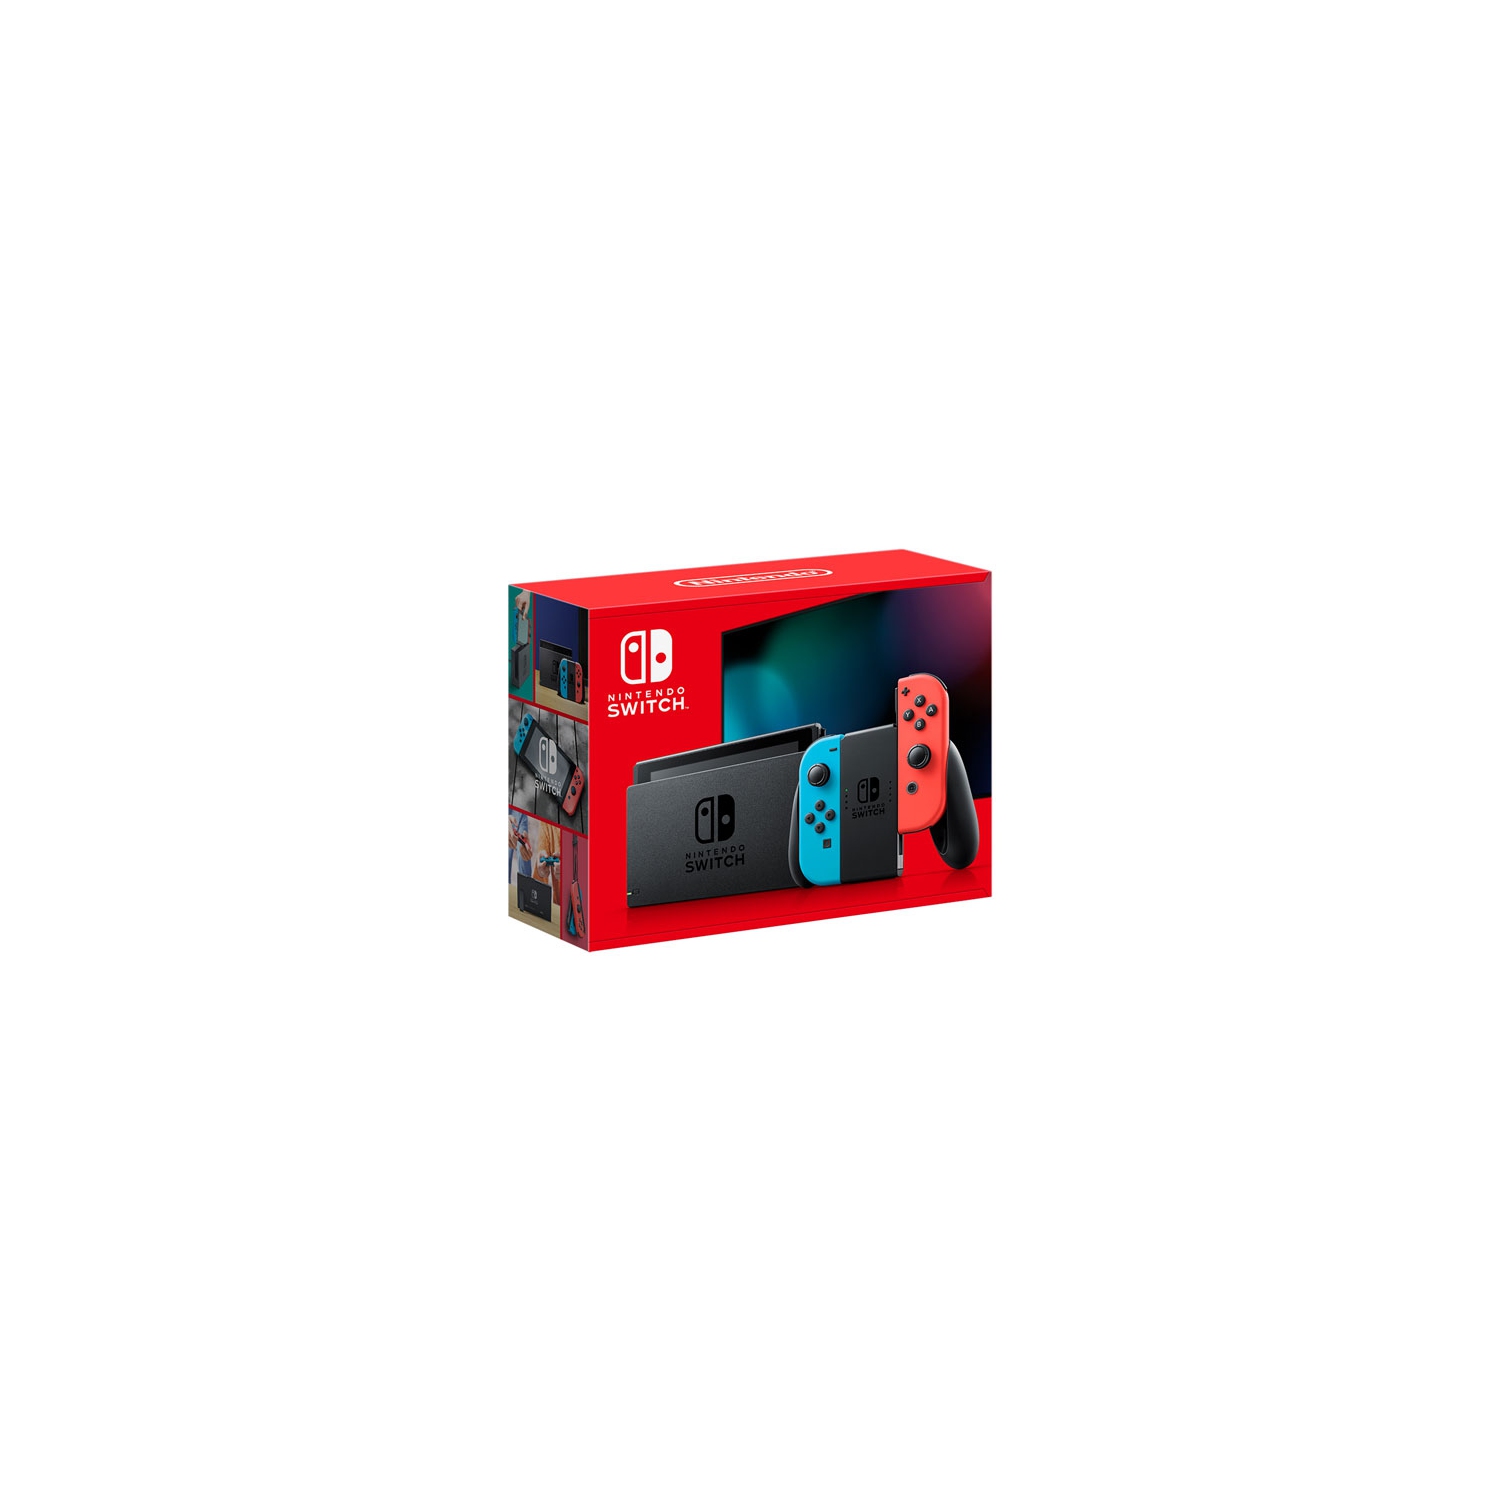 Open Box - Nintendo Switch Console with Neon Red/Blue Joy-Con